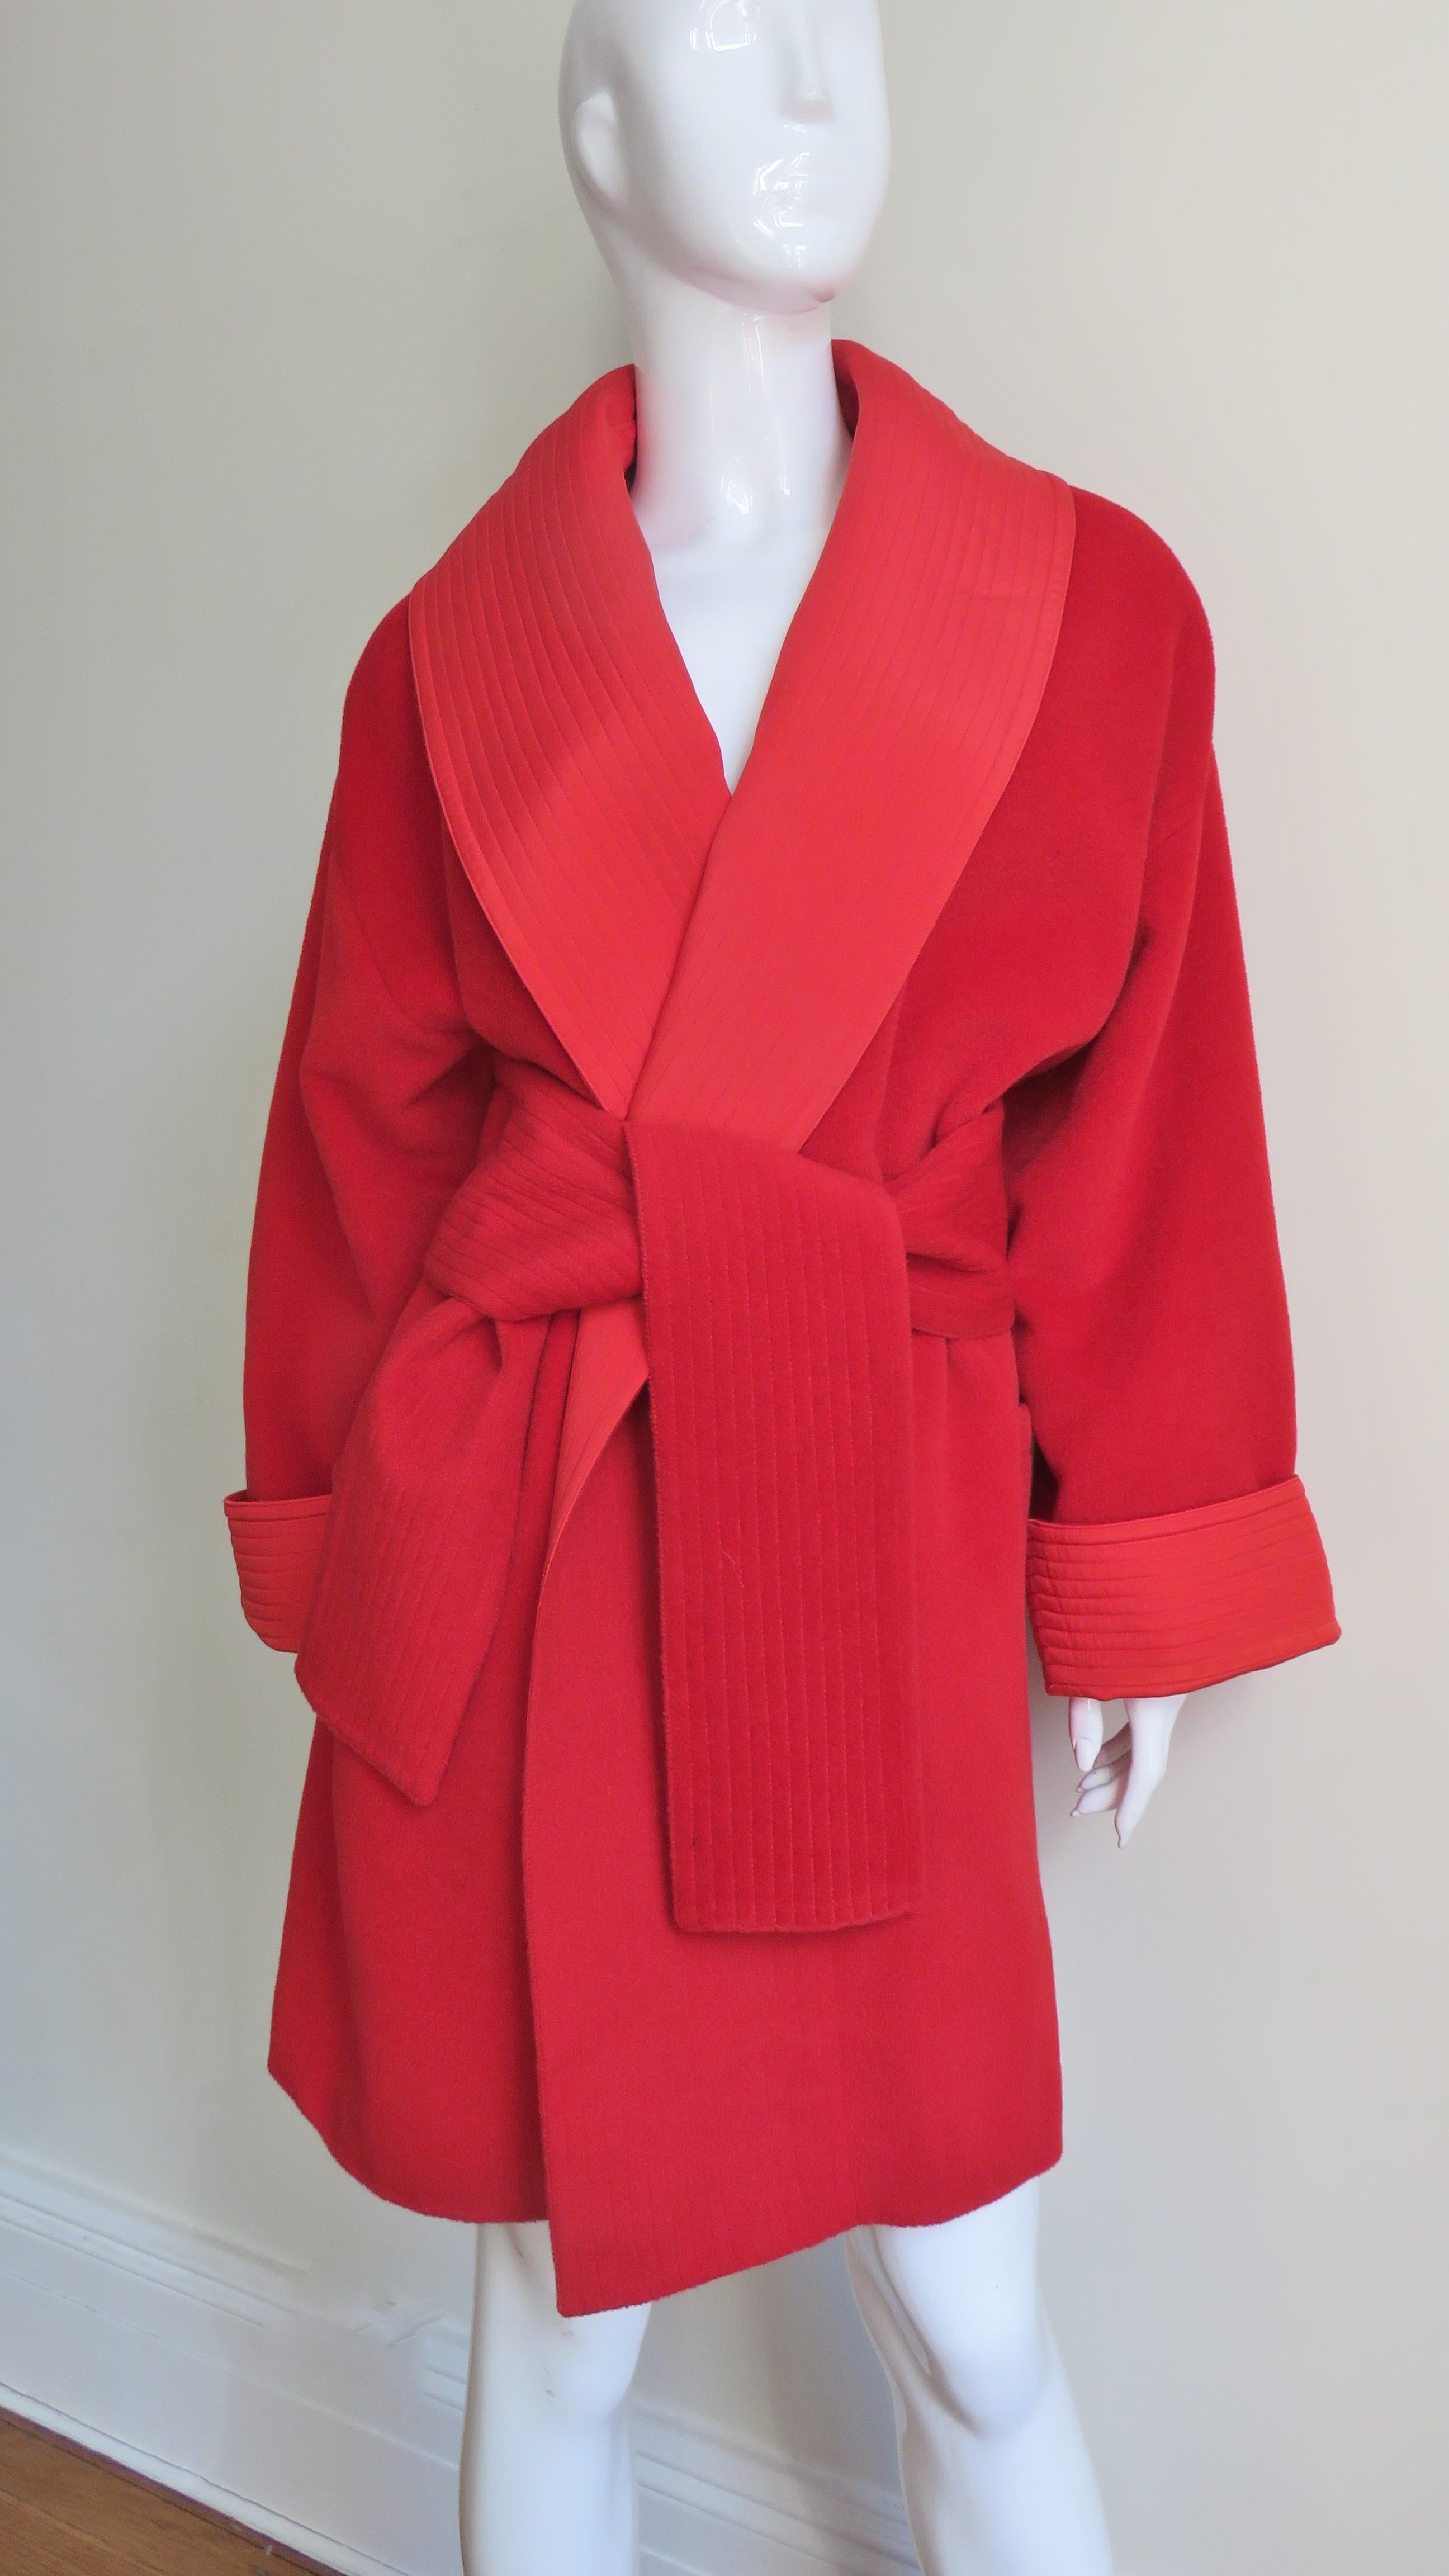 A fabulous wrap red wool jacket, coat by Gianni Versace.  It has a large shawl collar, generous fold back cuffs on dolman sleeves and a wide reverseable tie belt (wool on one side silk on the other) all with rows of topstitching on matching red silk